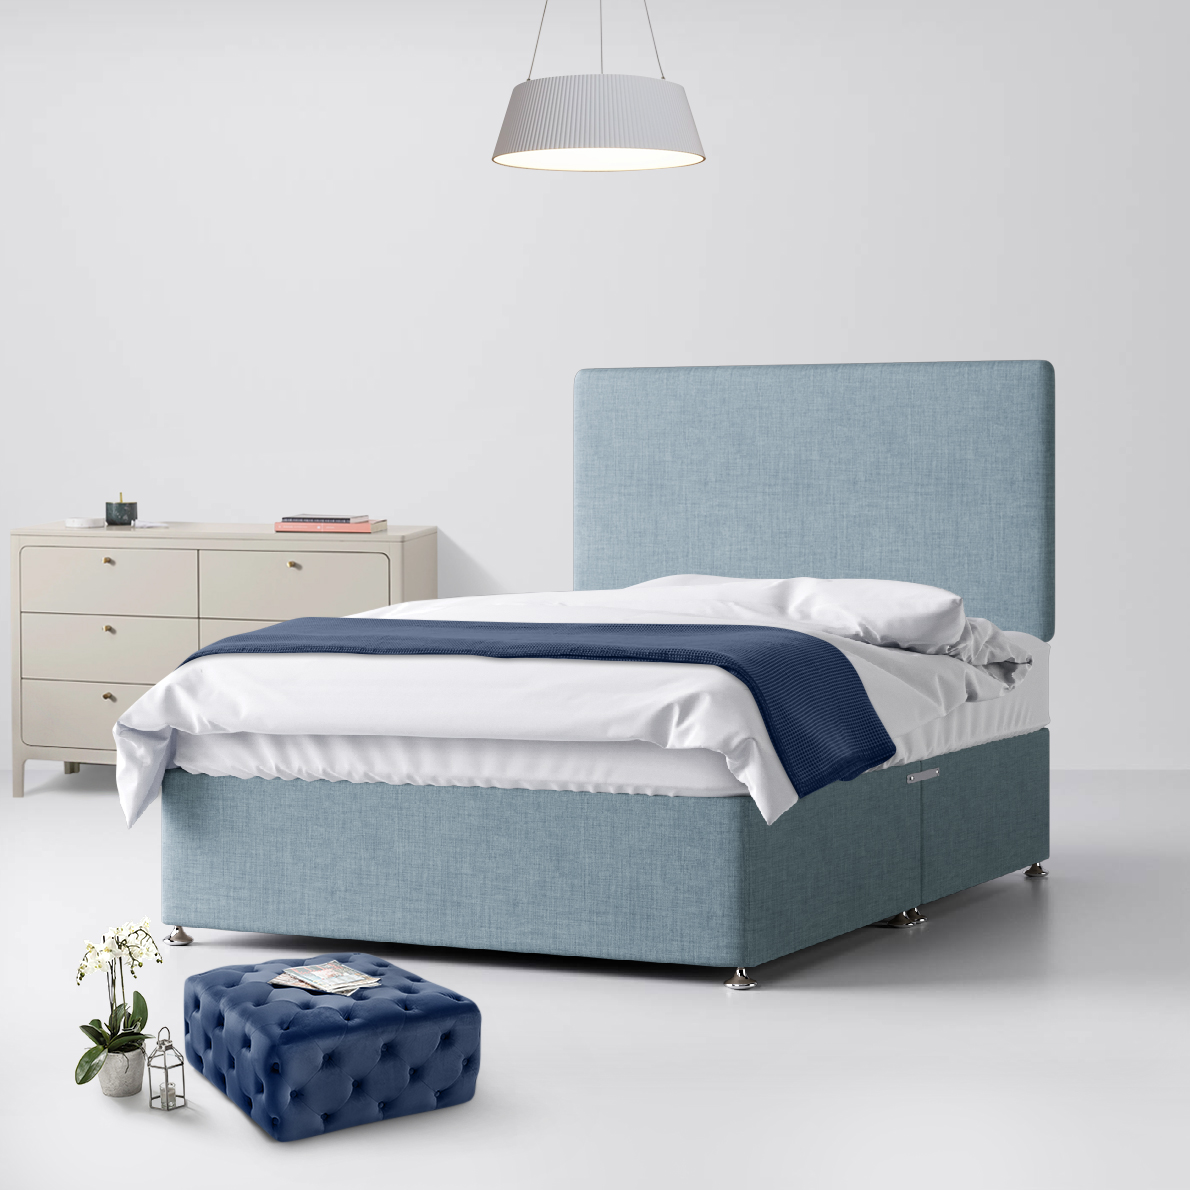 Small Double - Divan Bed and Cornell Plain Headboard - Duck Egg Blue - Fabric - 4ft - Happy Beds